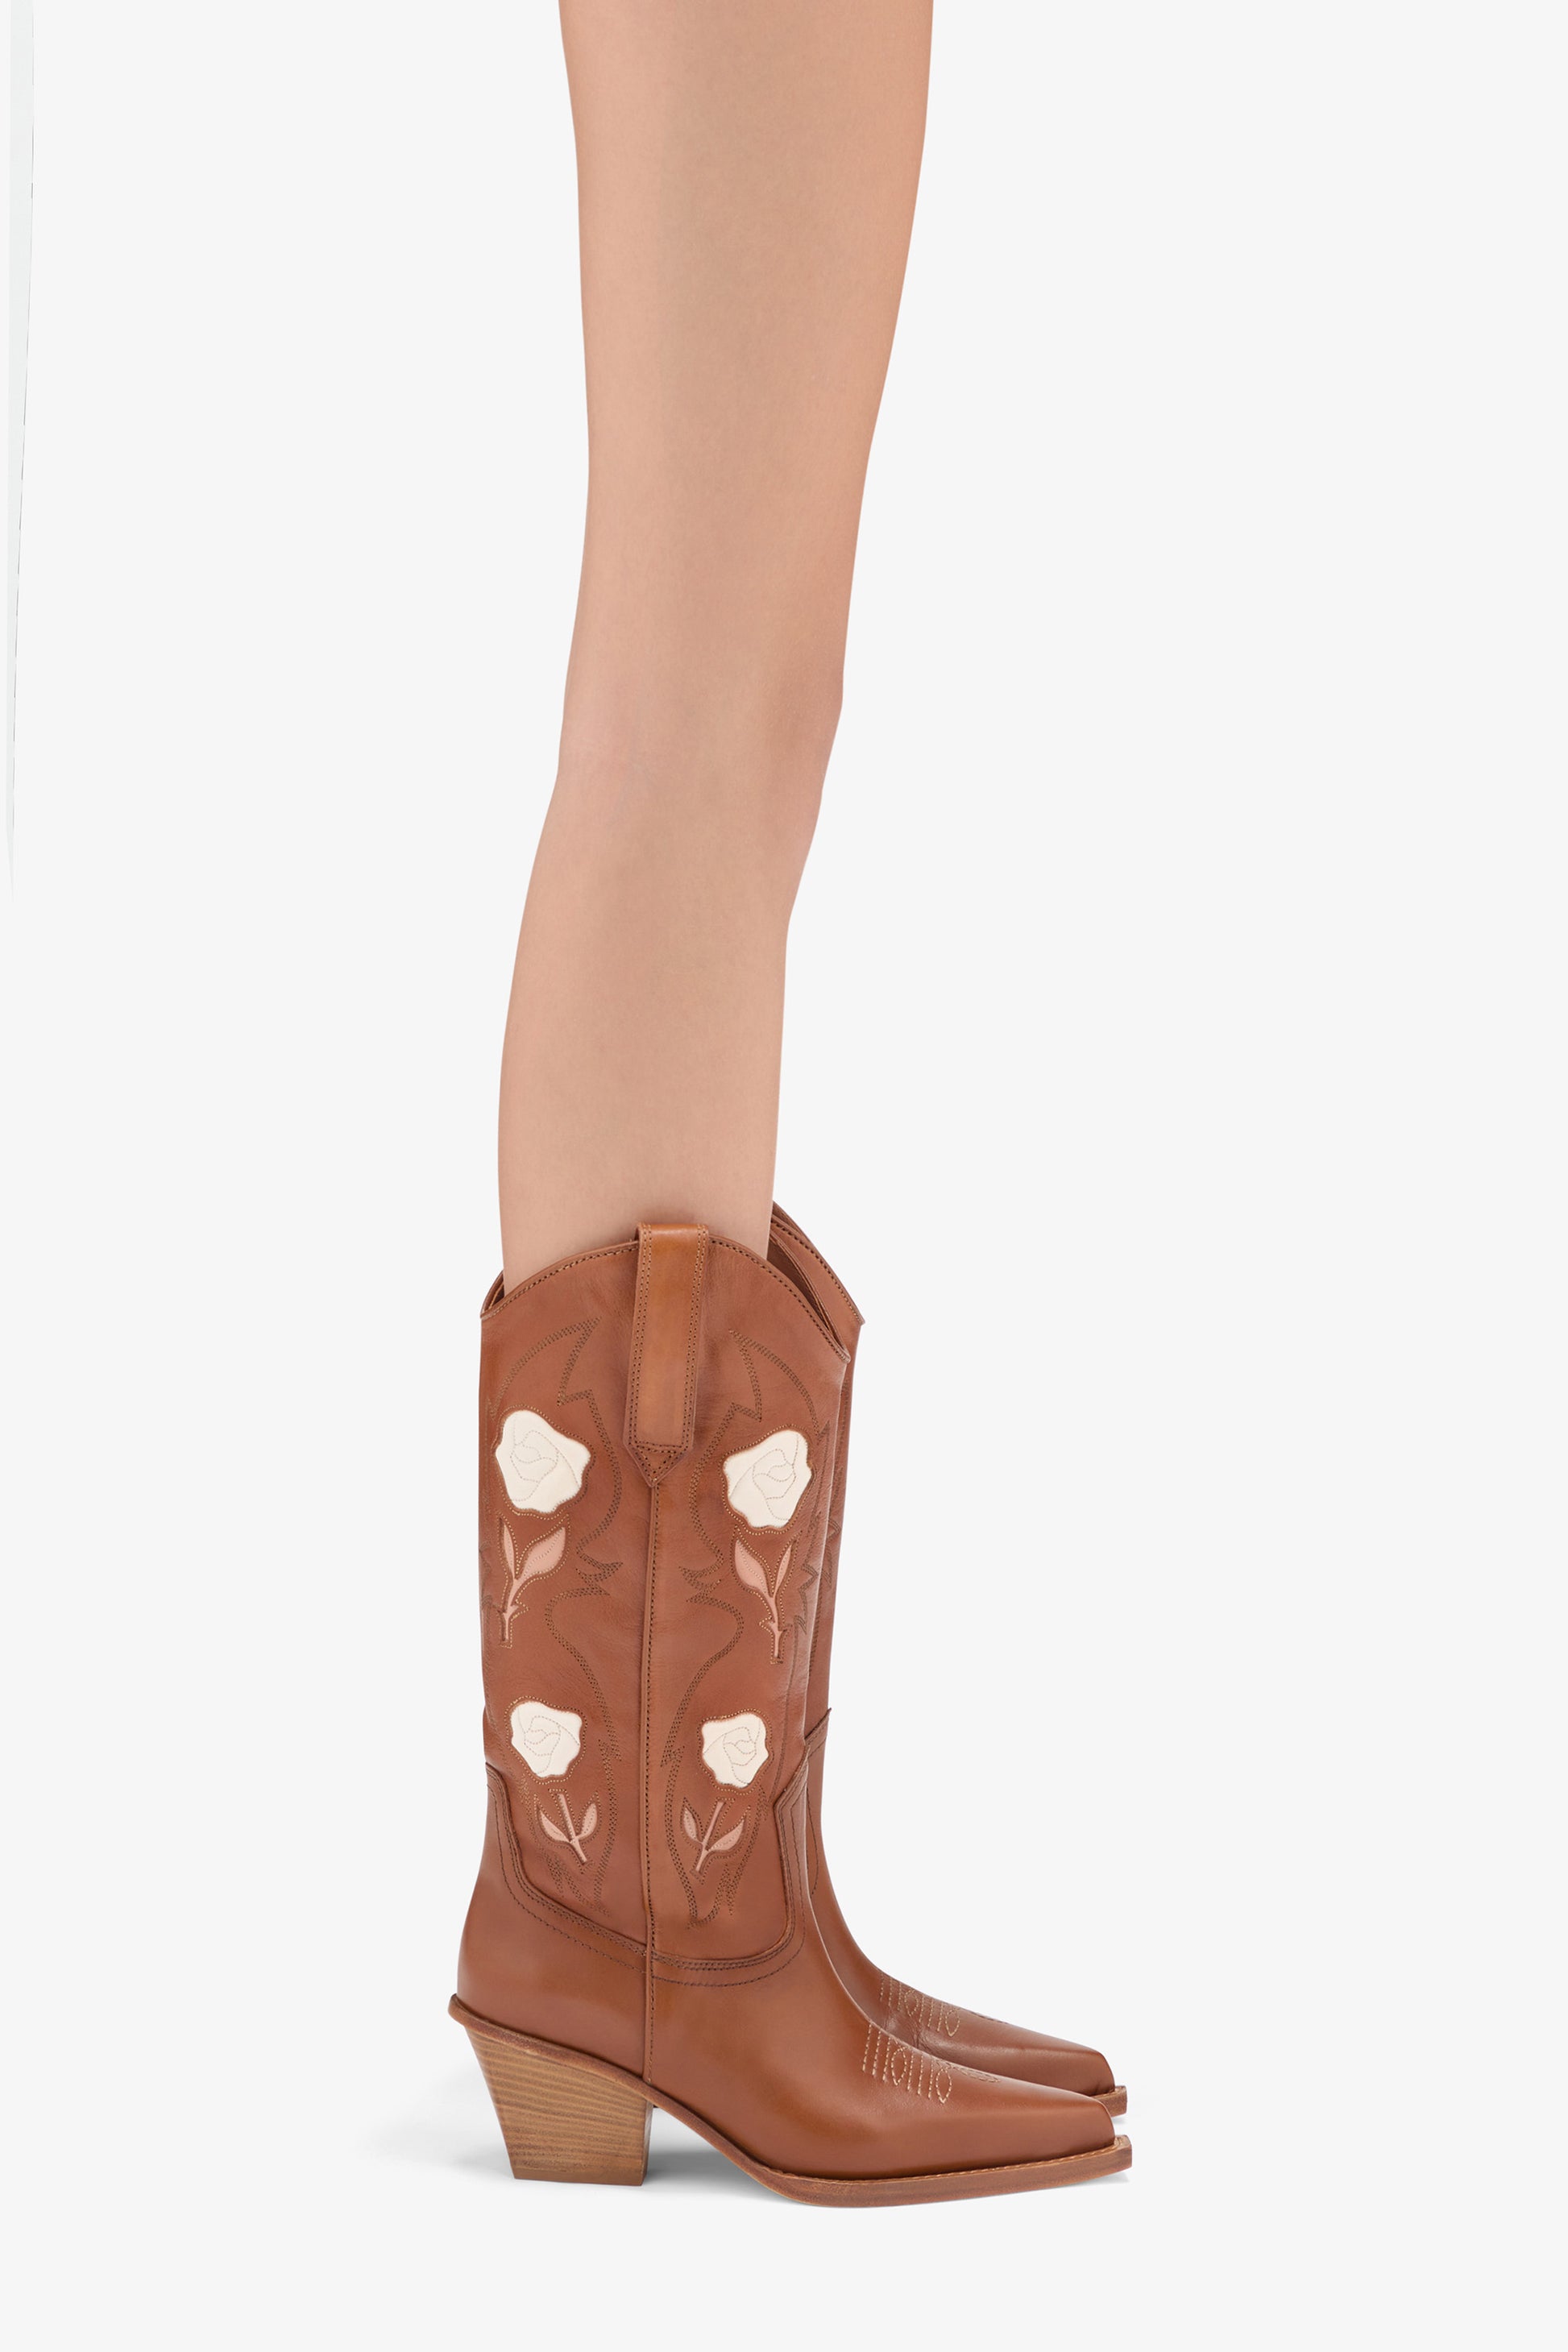 Embroidered tan suede Texan boot - Product worn